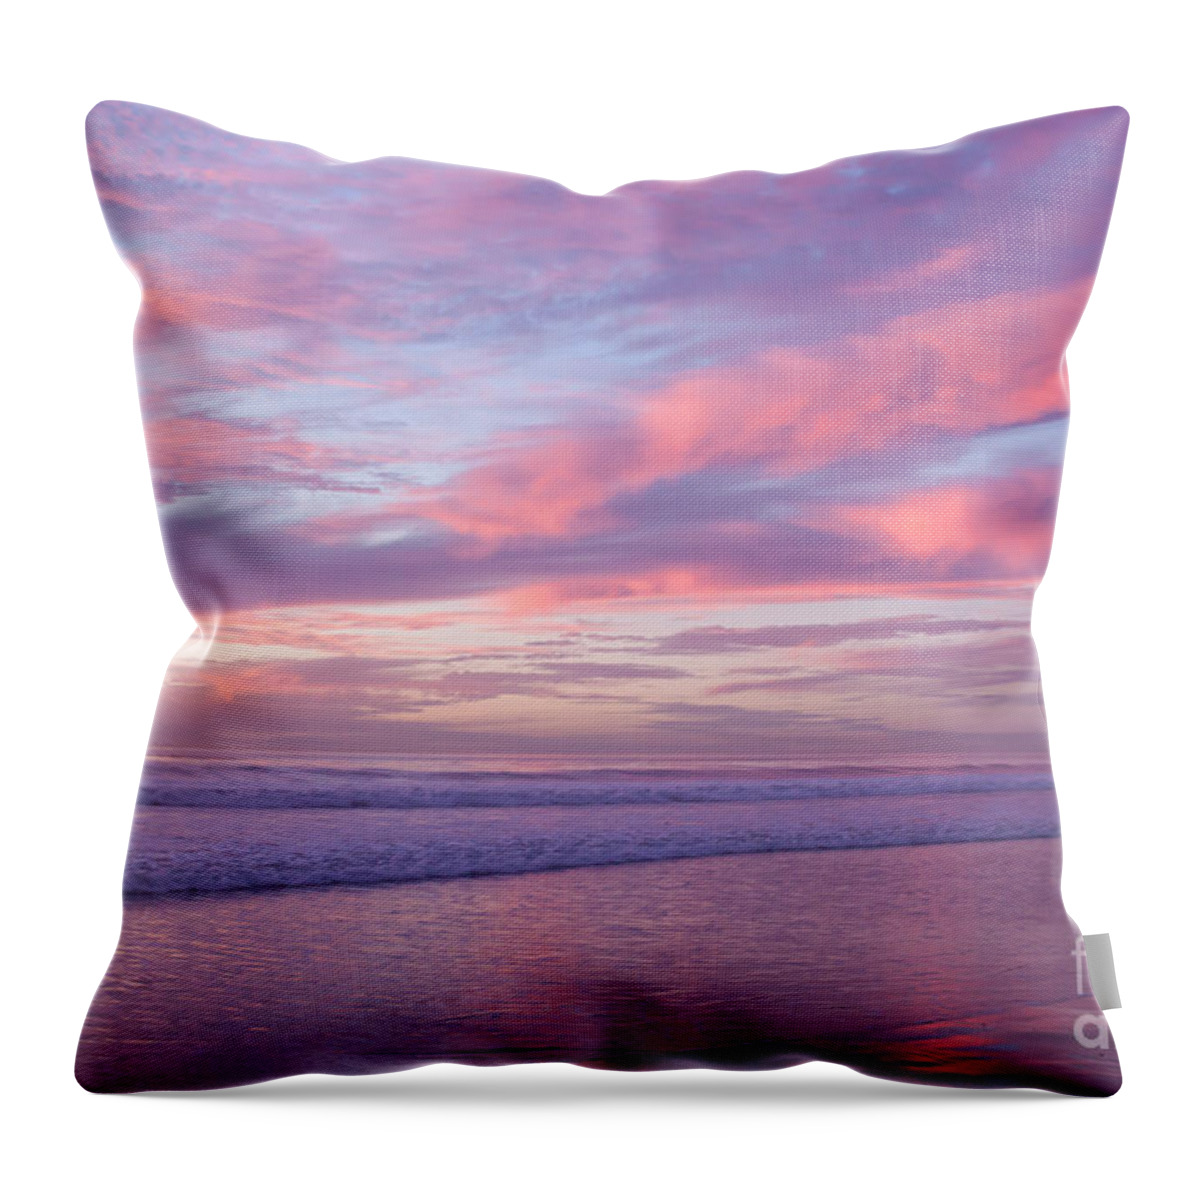 Sunset Throw Pillow featuring the photograph Pink and Lavender Sunset by Ana V Ramirez